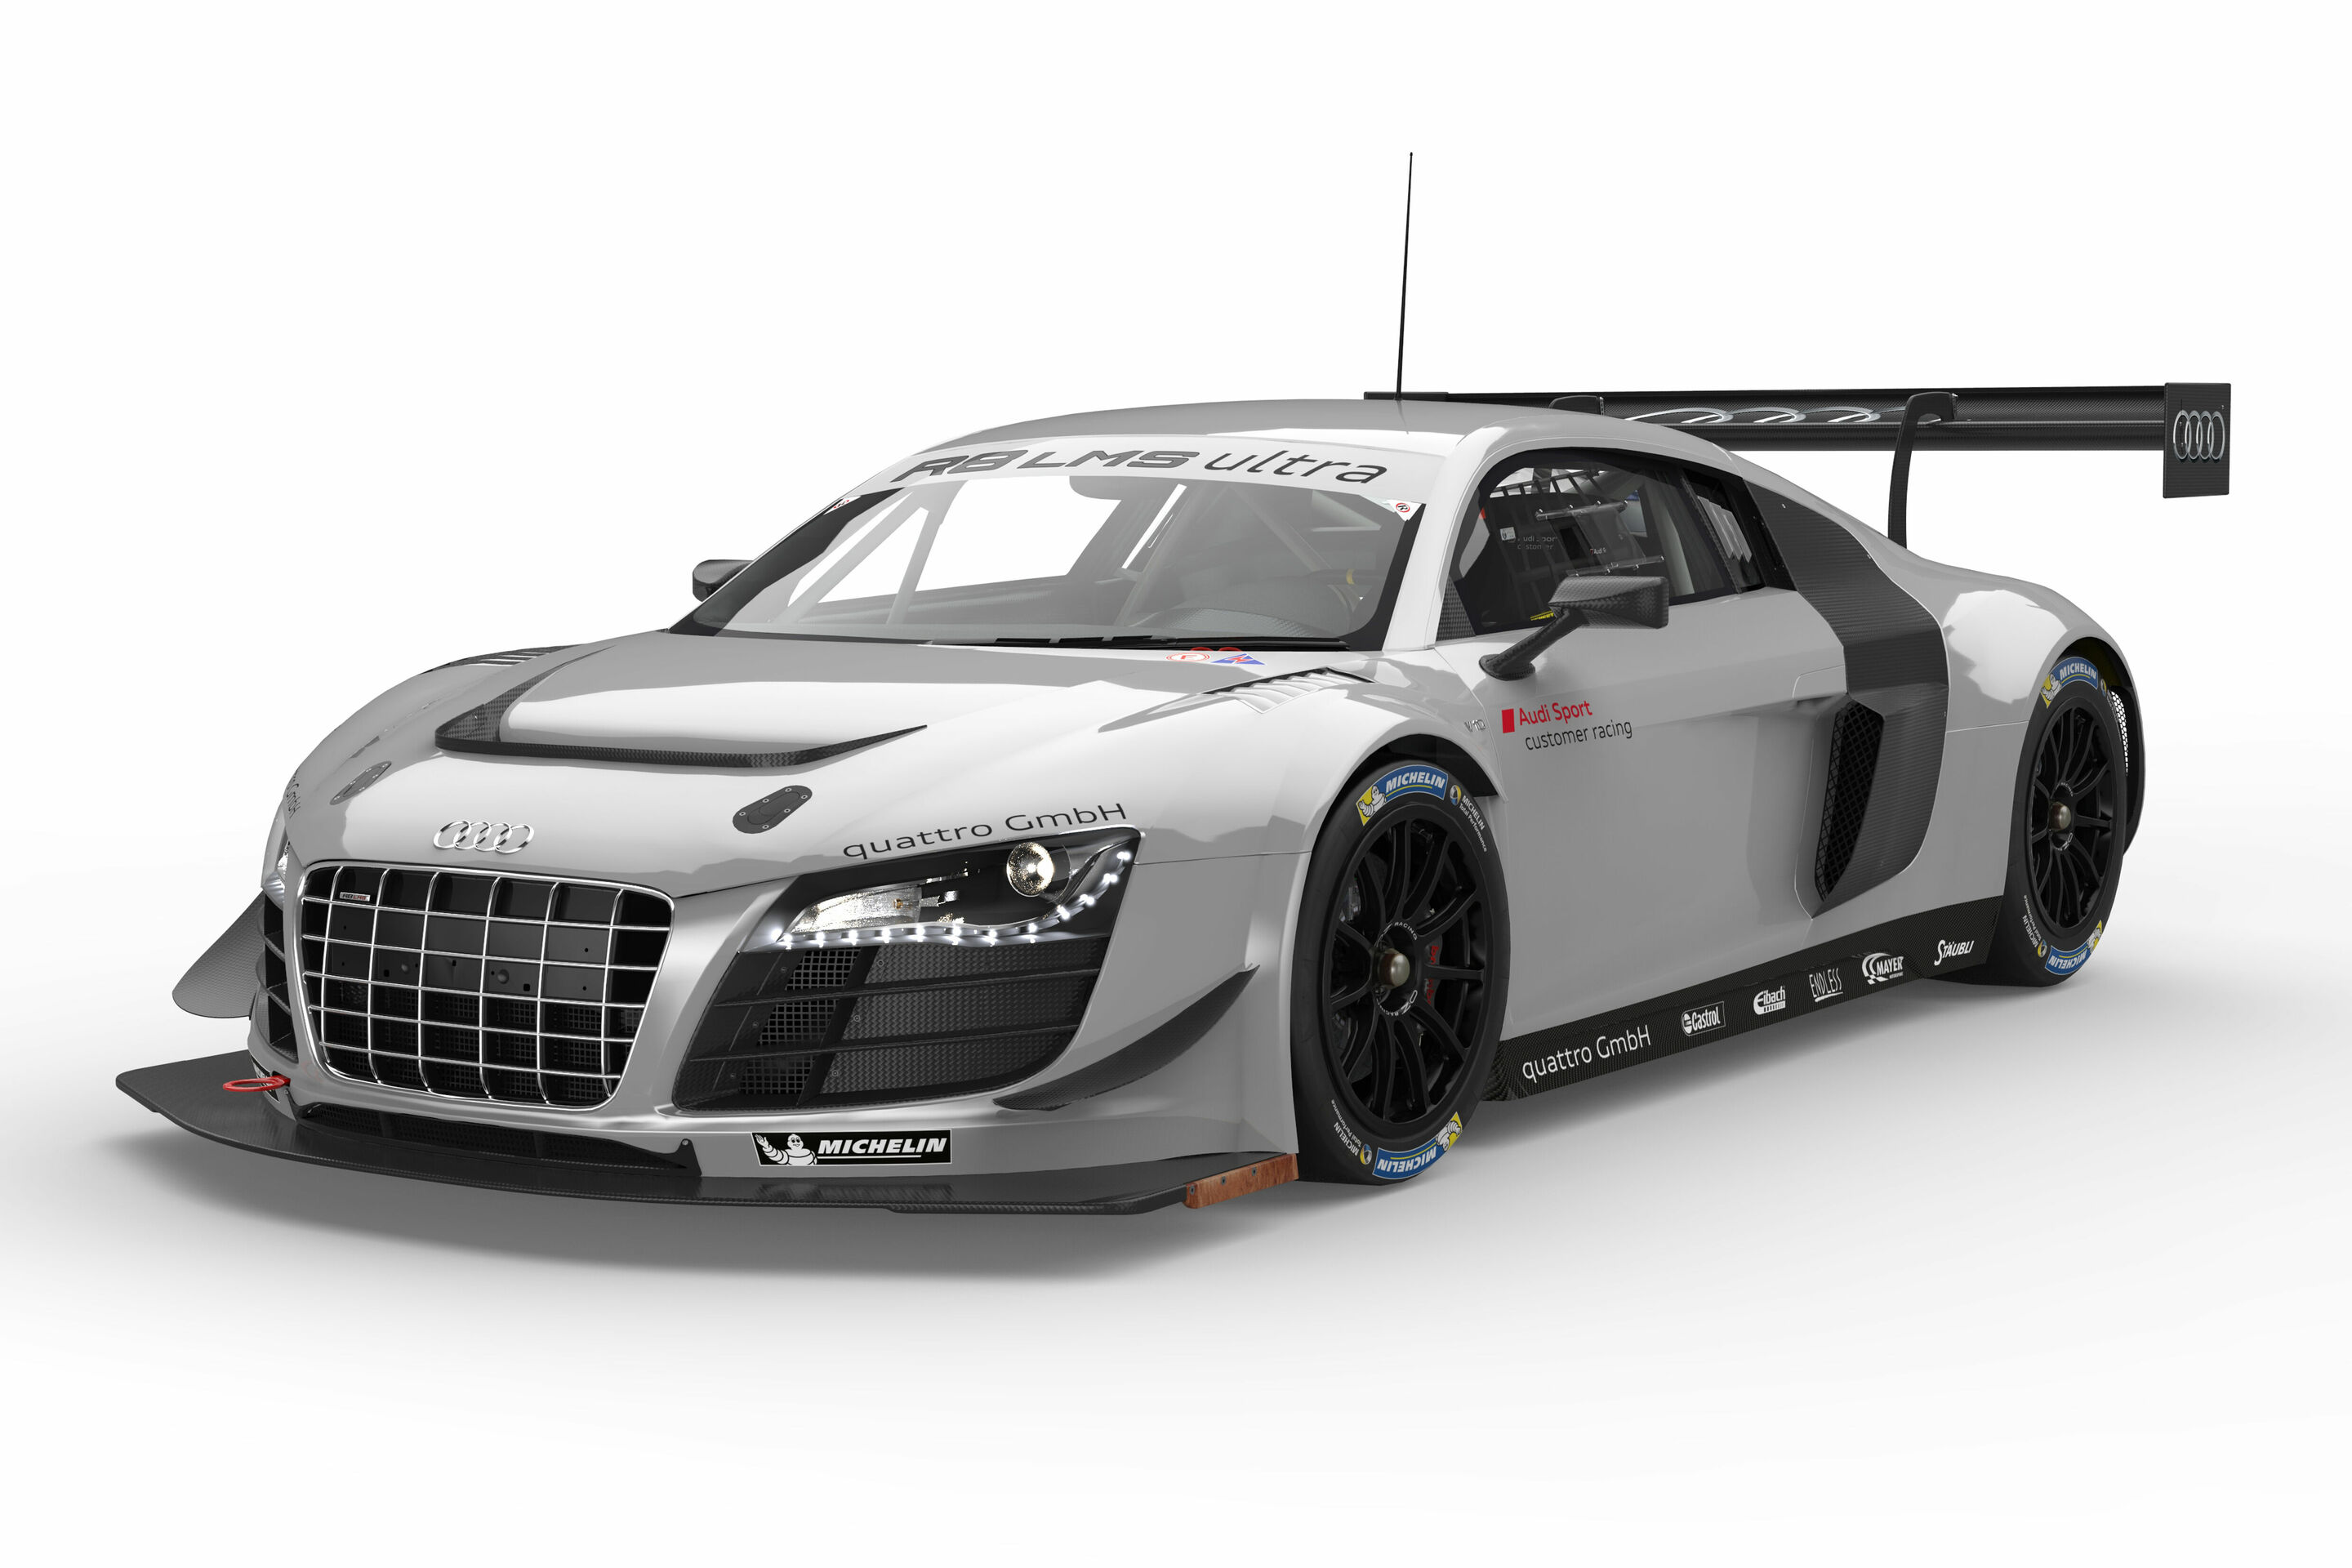 Five Audi teams rely on the R8 LMS ultra in the Nürburgring 24 Hours